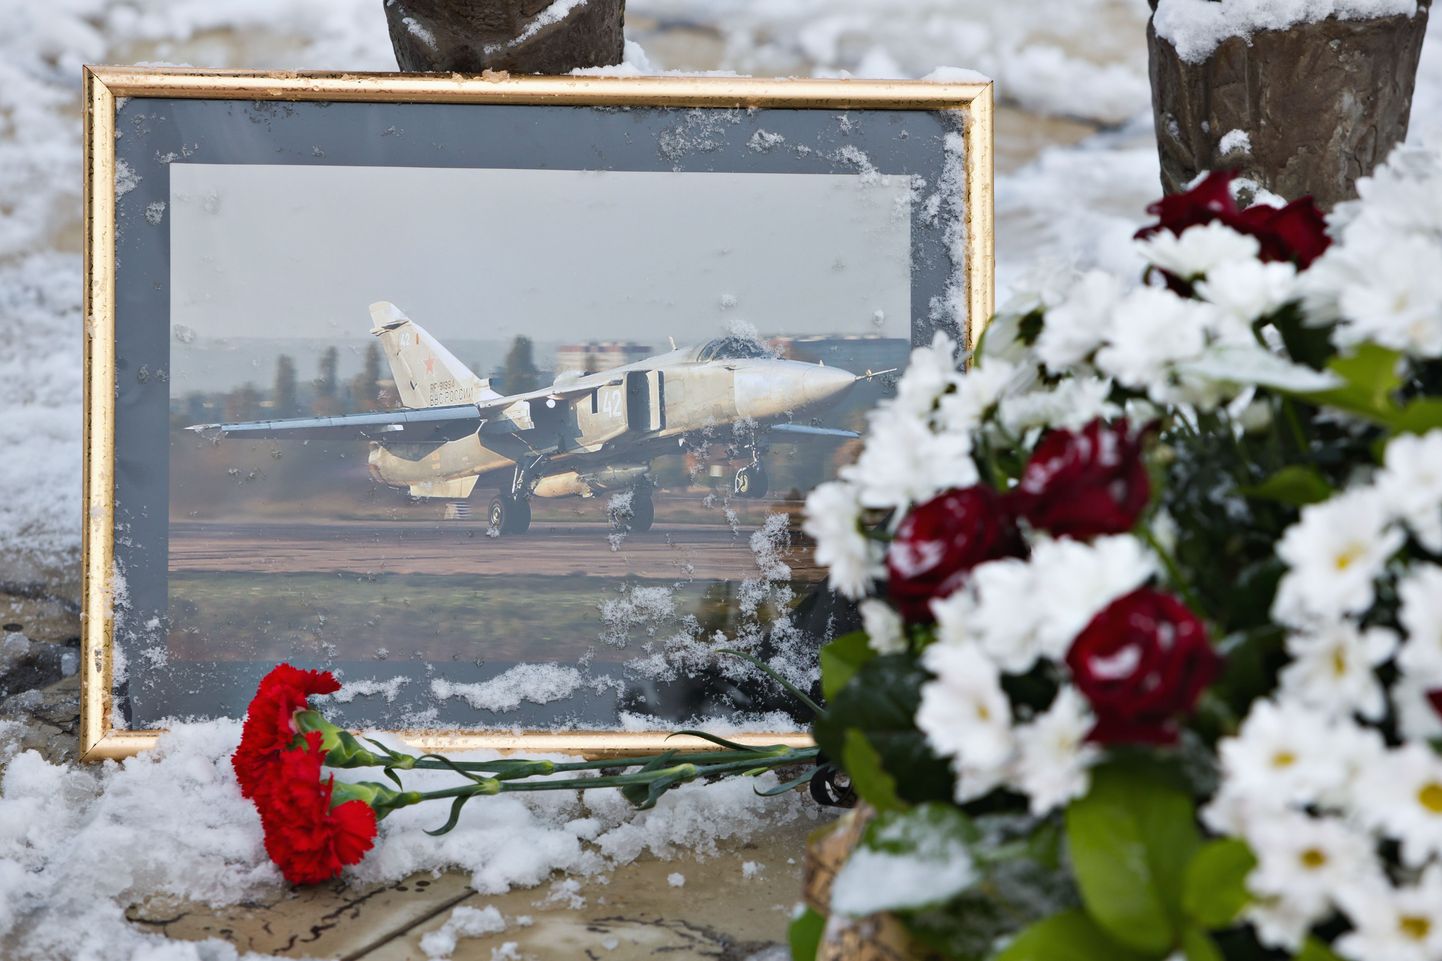 2746946 11/26/2015 Flowers laid at the monument to pilots in the center of Lipetsk in memory of Lieutenant Colonel Oleg Peshkov of the Lipetsk Air Force Center, the commander of the downed bomber Su-24. Jurij Sorokin/Sputnik